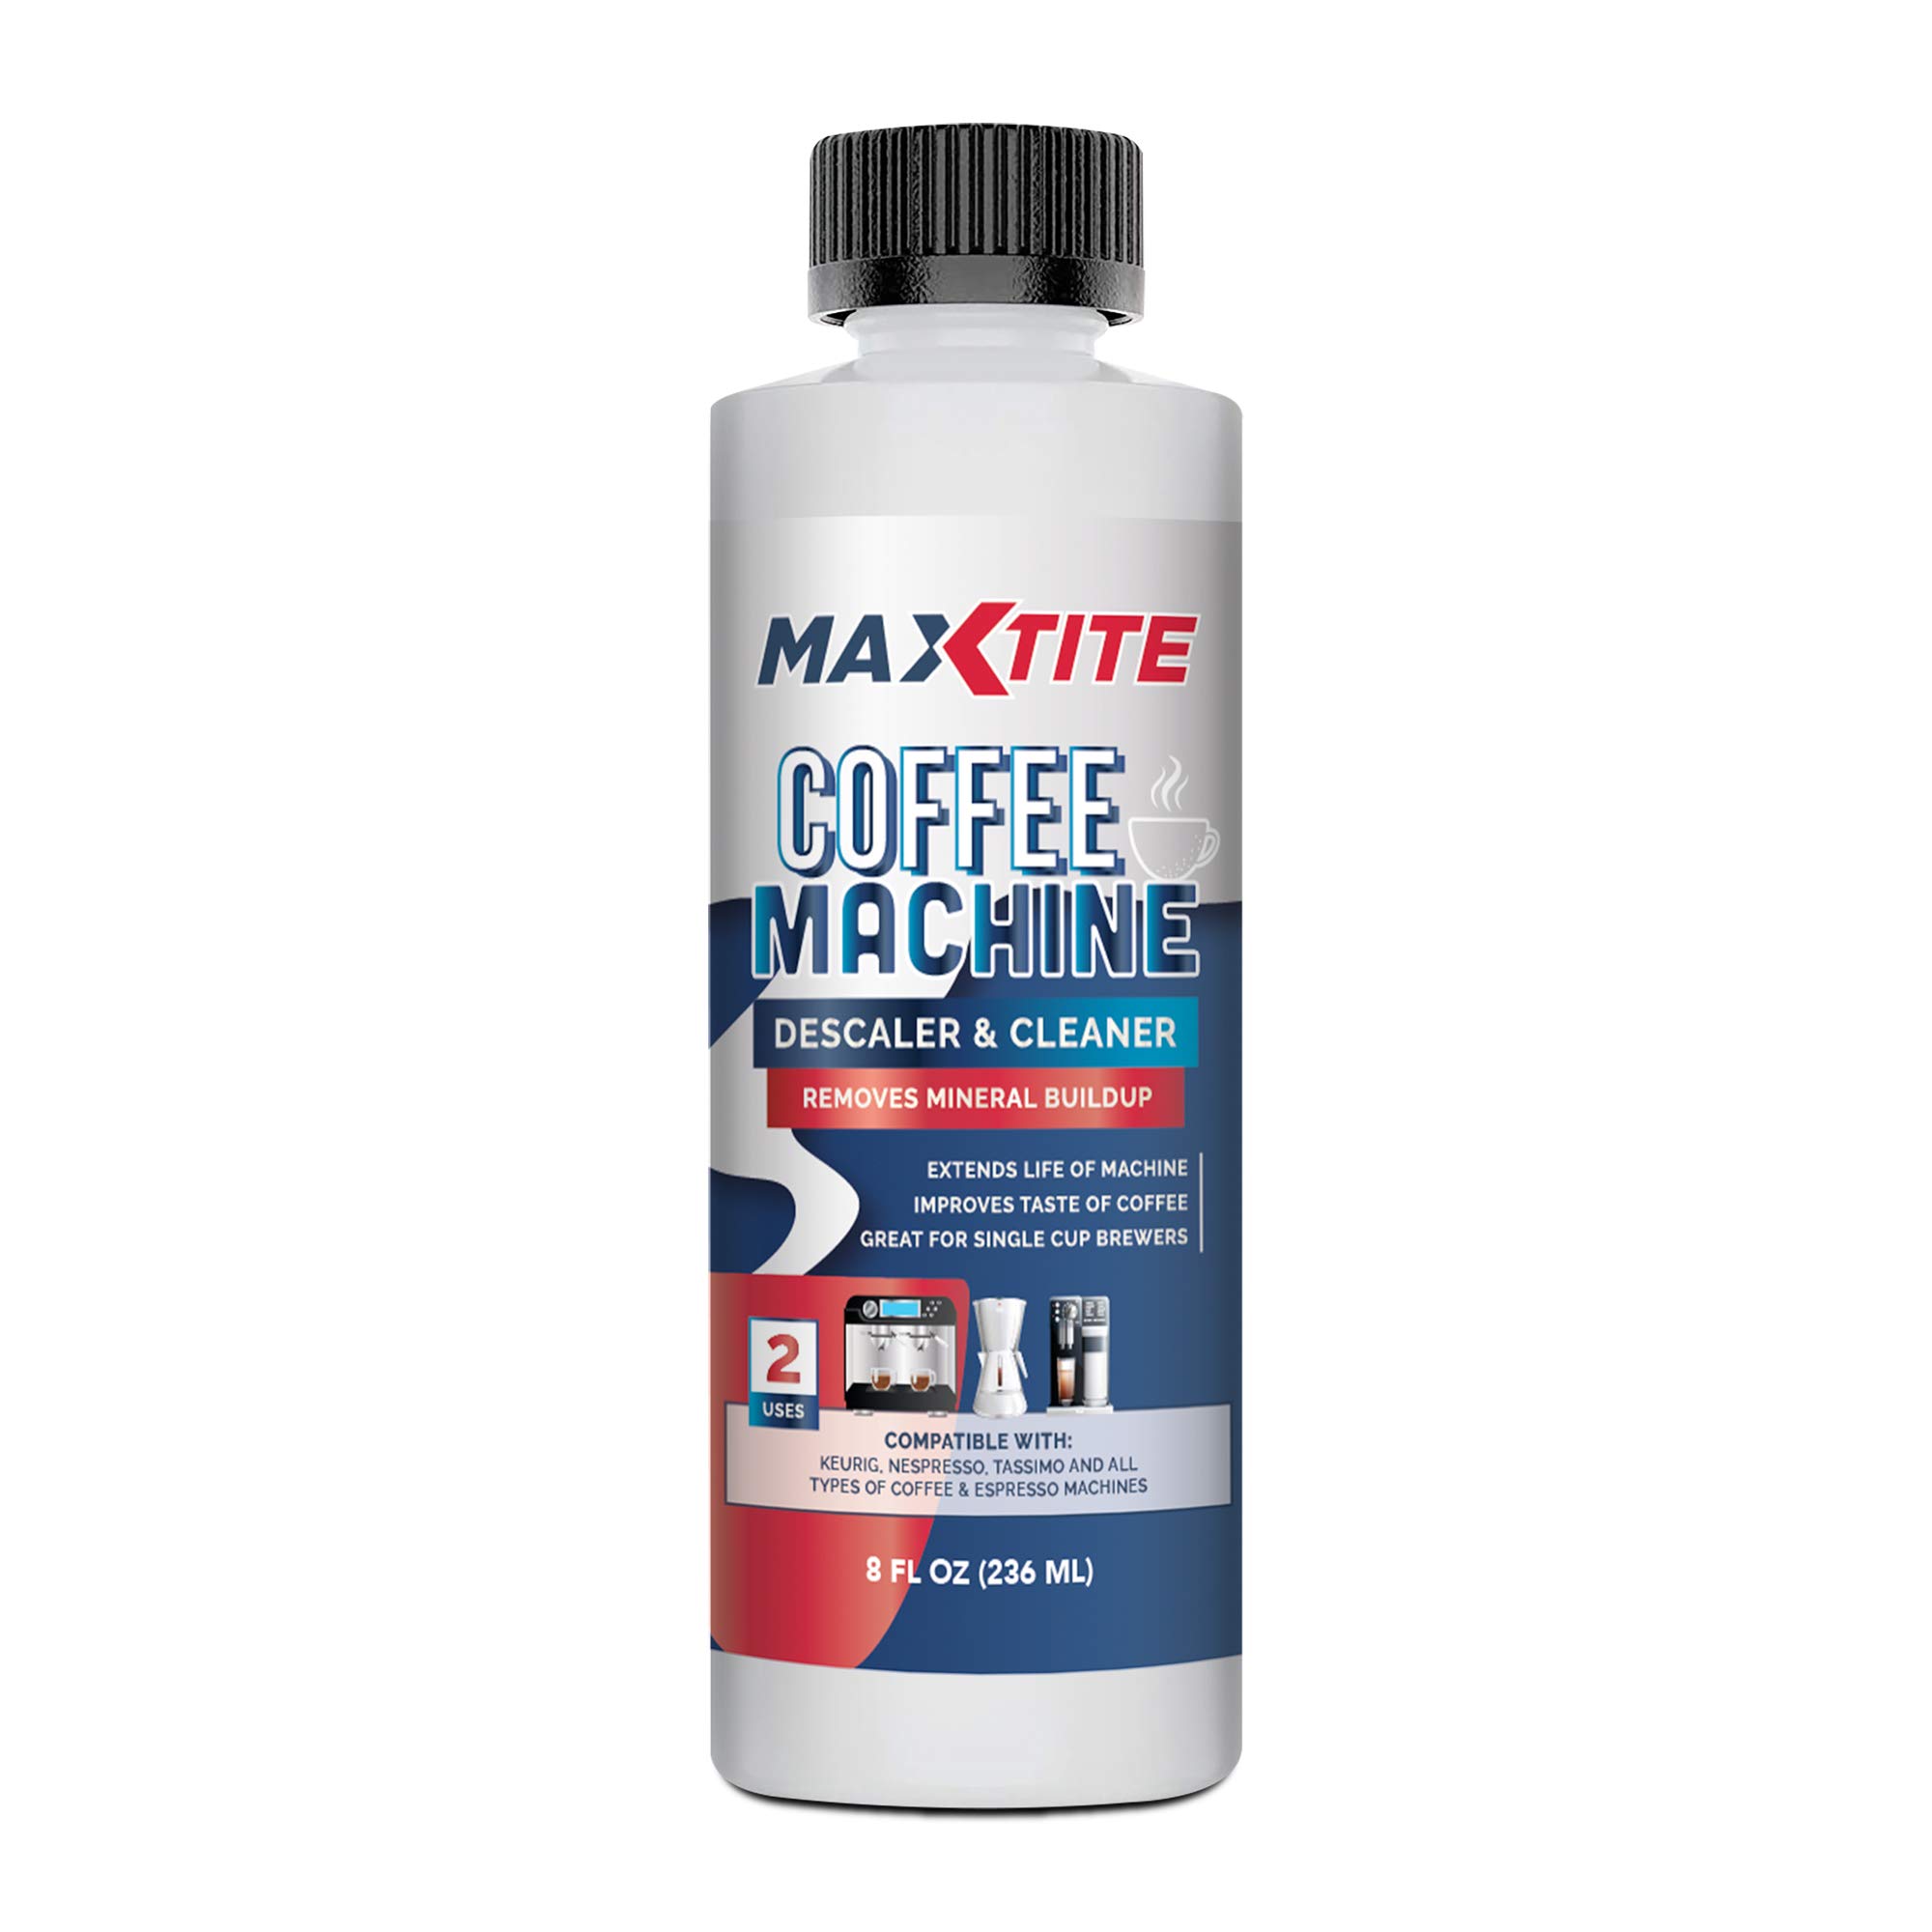 MaxTite coffee Machine Descaler & cleaner (8oz) - Made in the USA - Universal Descaling Solution for Keurig, Nespresso, Delonghi